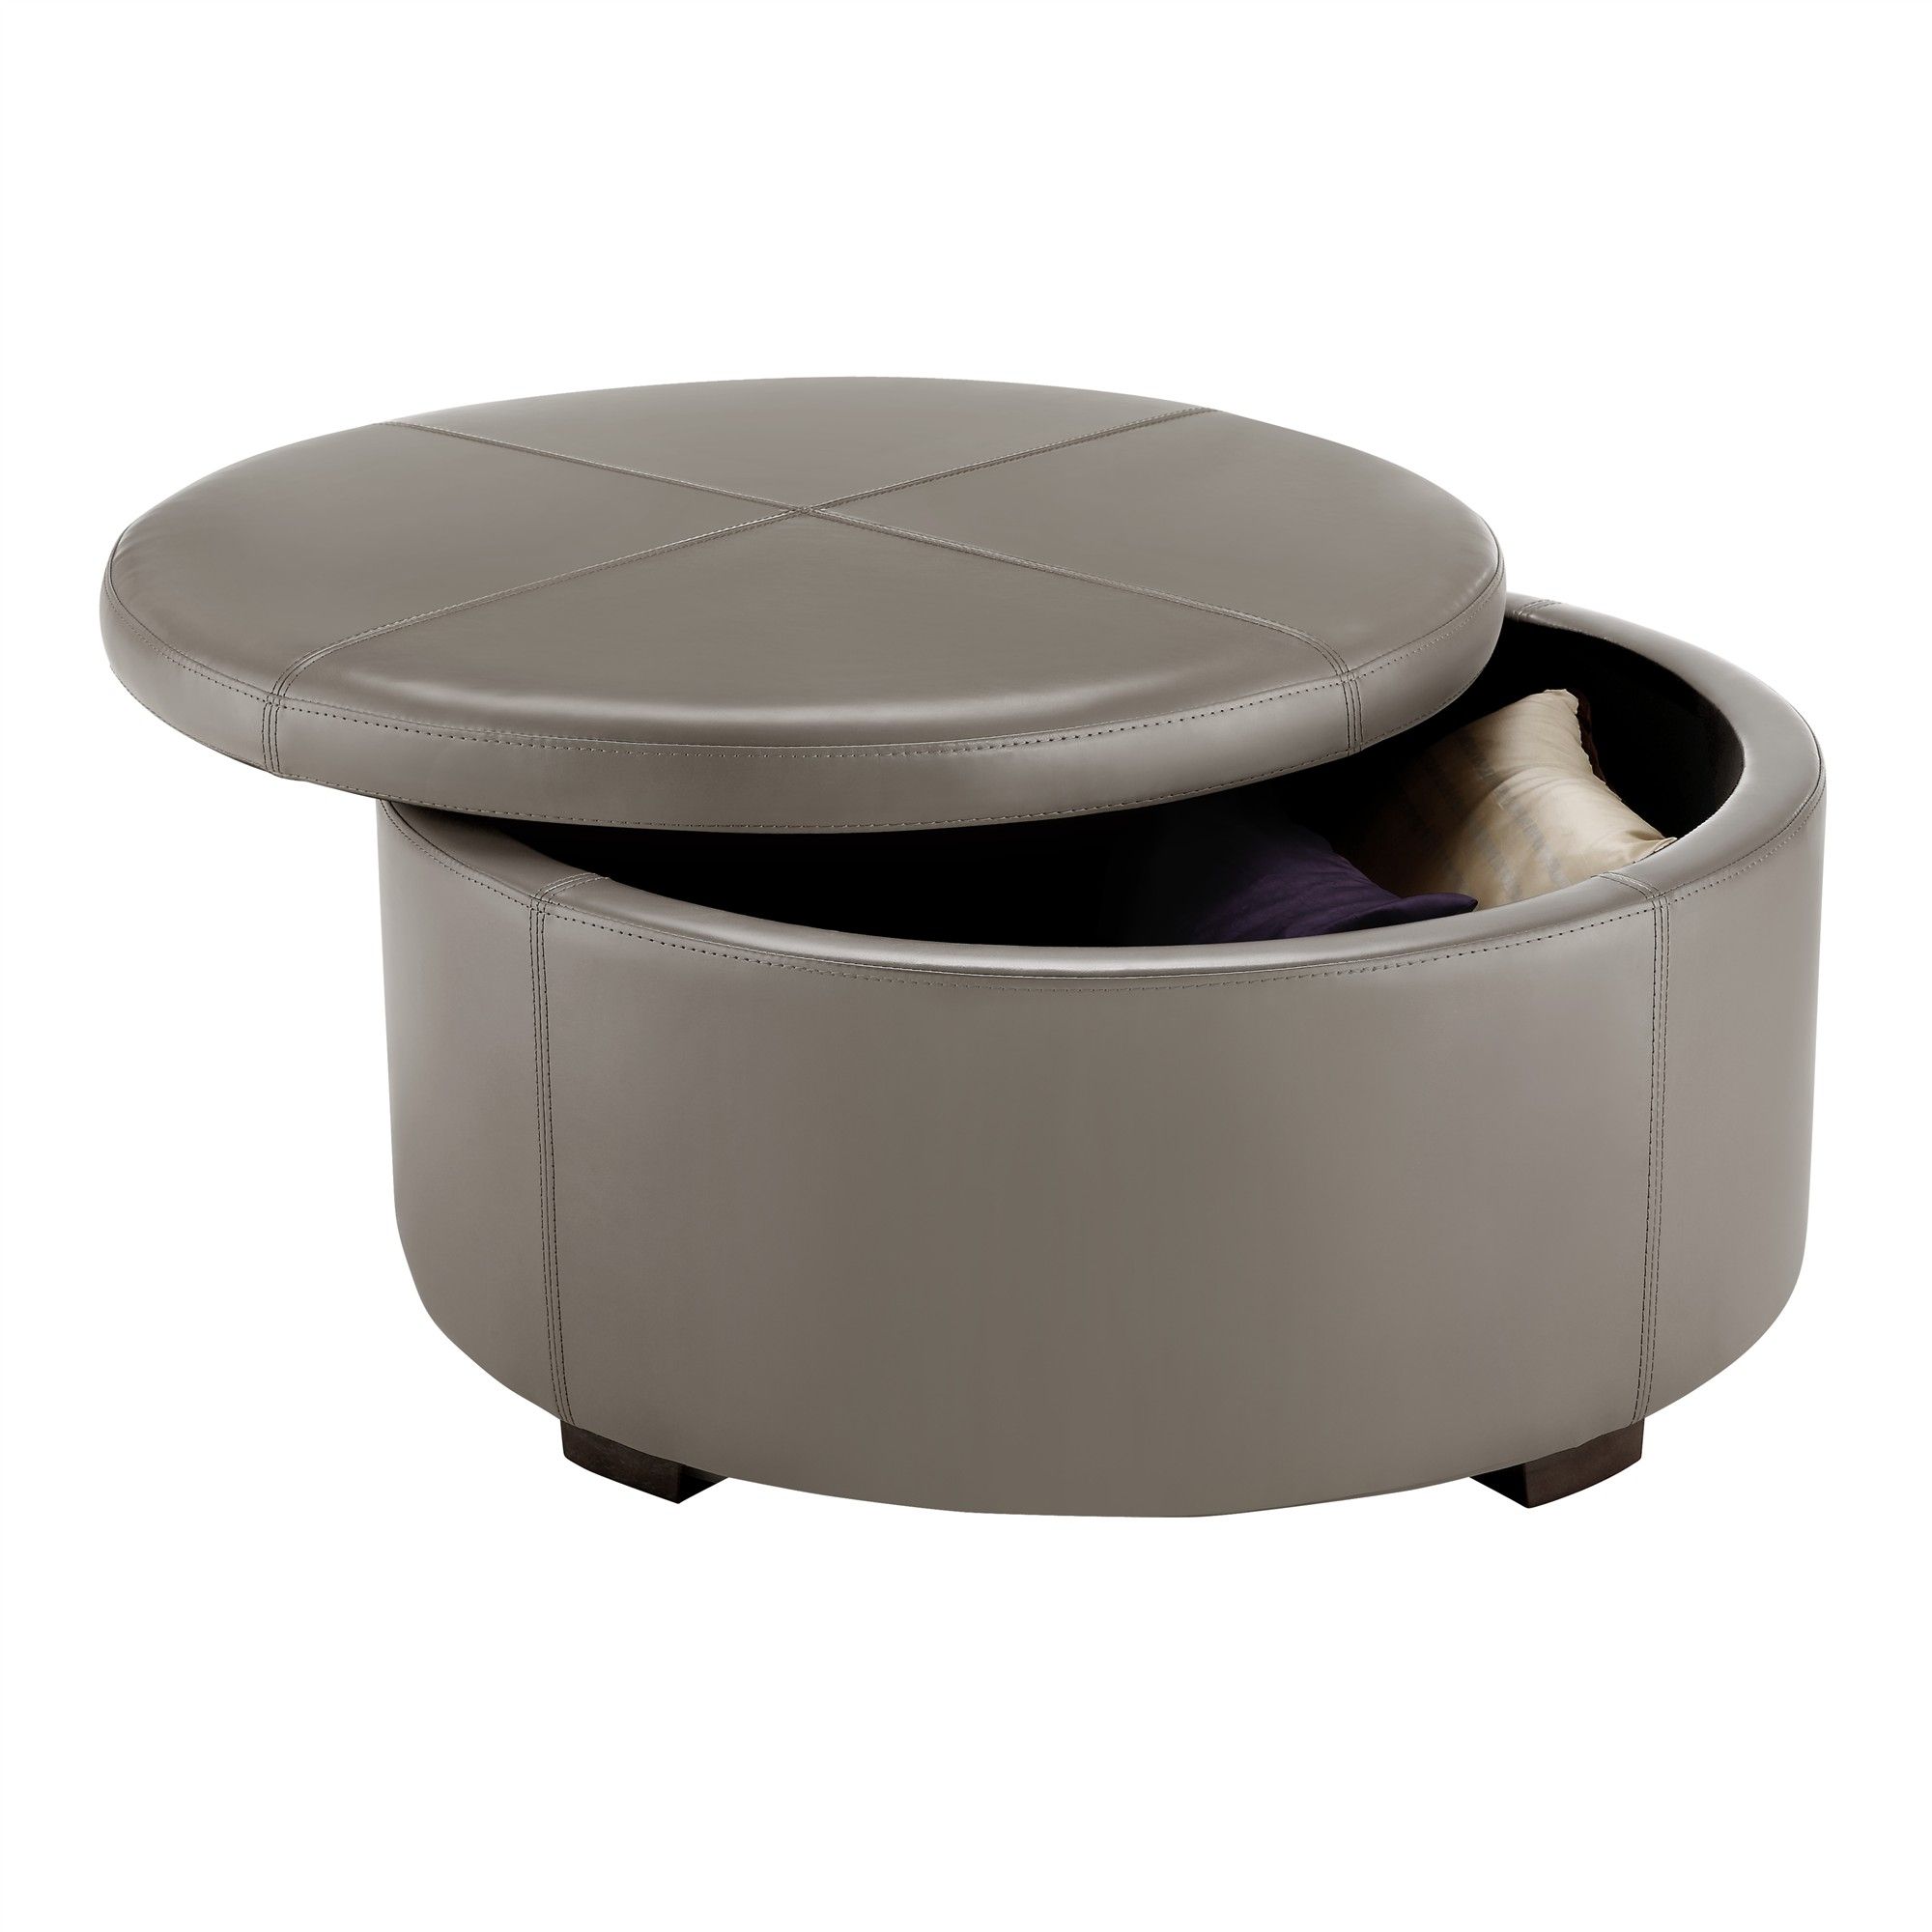 Furniture Square Black Leather Storage Ottoman Coffee Table Round Leather Storage Ottoman Coffee Table (View 4 of 10)